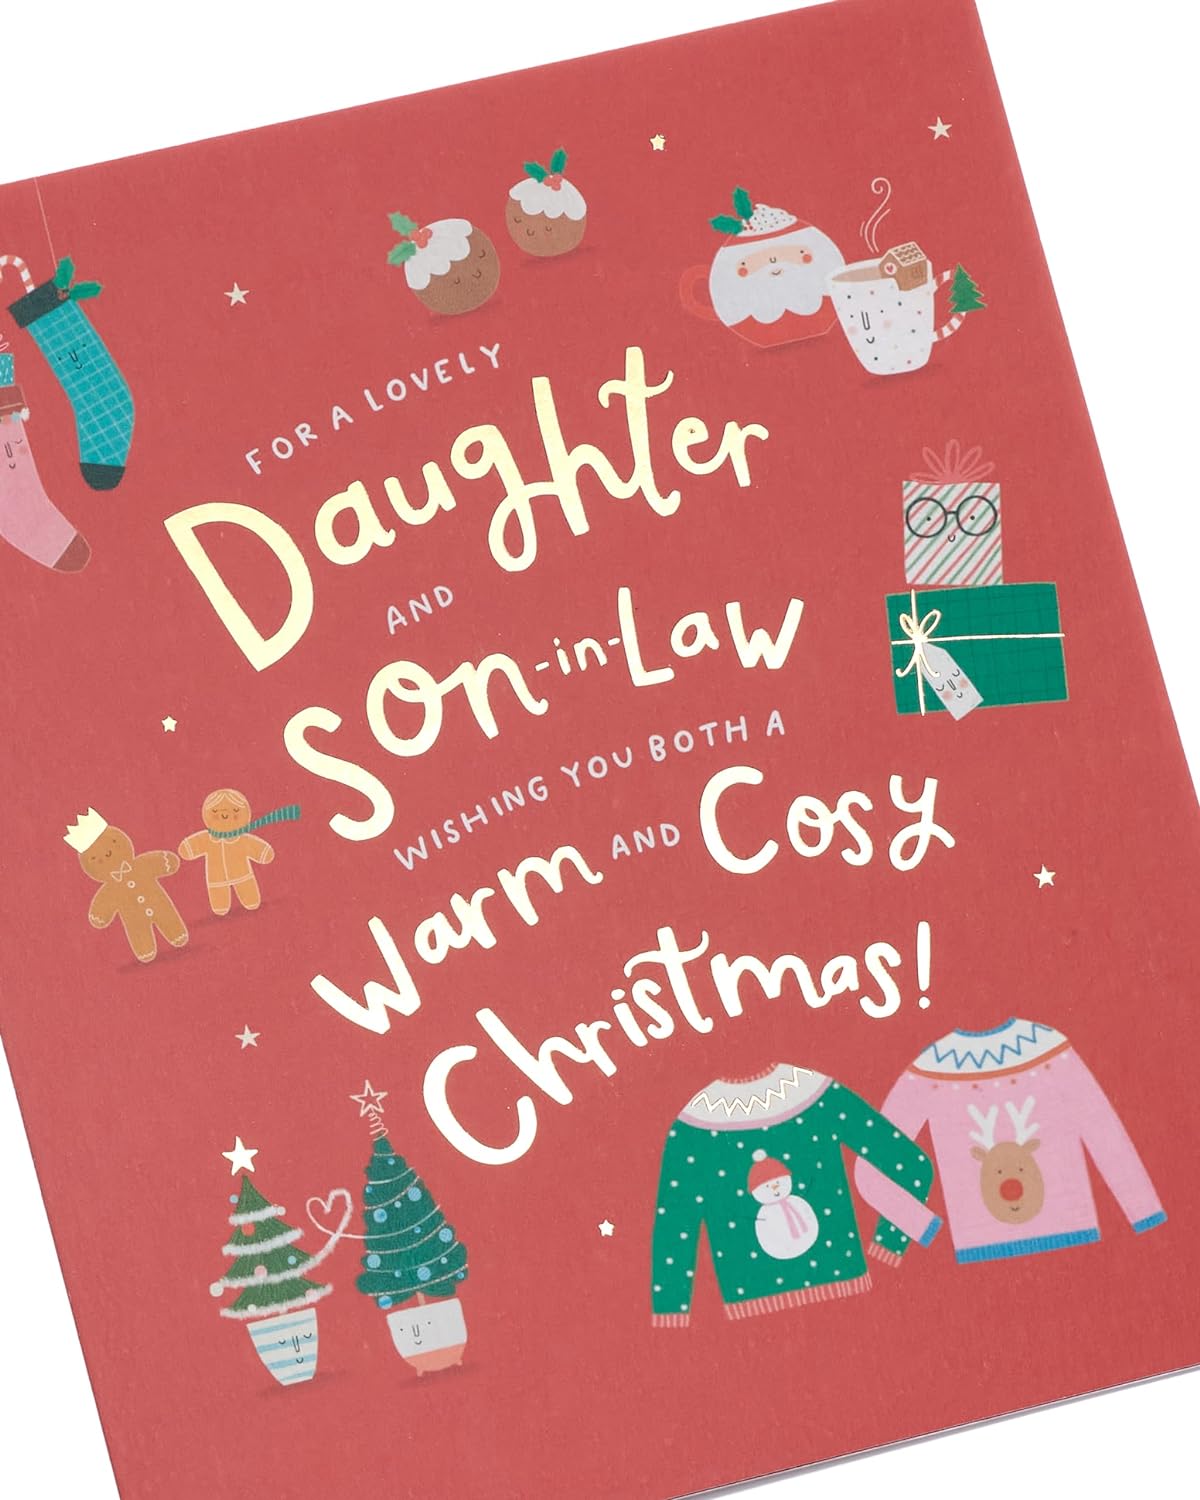 Daughter & Son-in-Law Christmas Card Sweet Cosy Design 